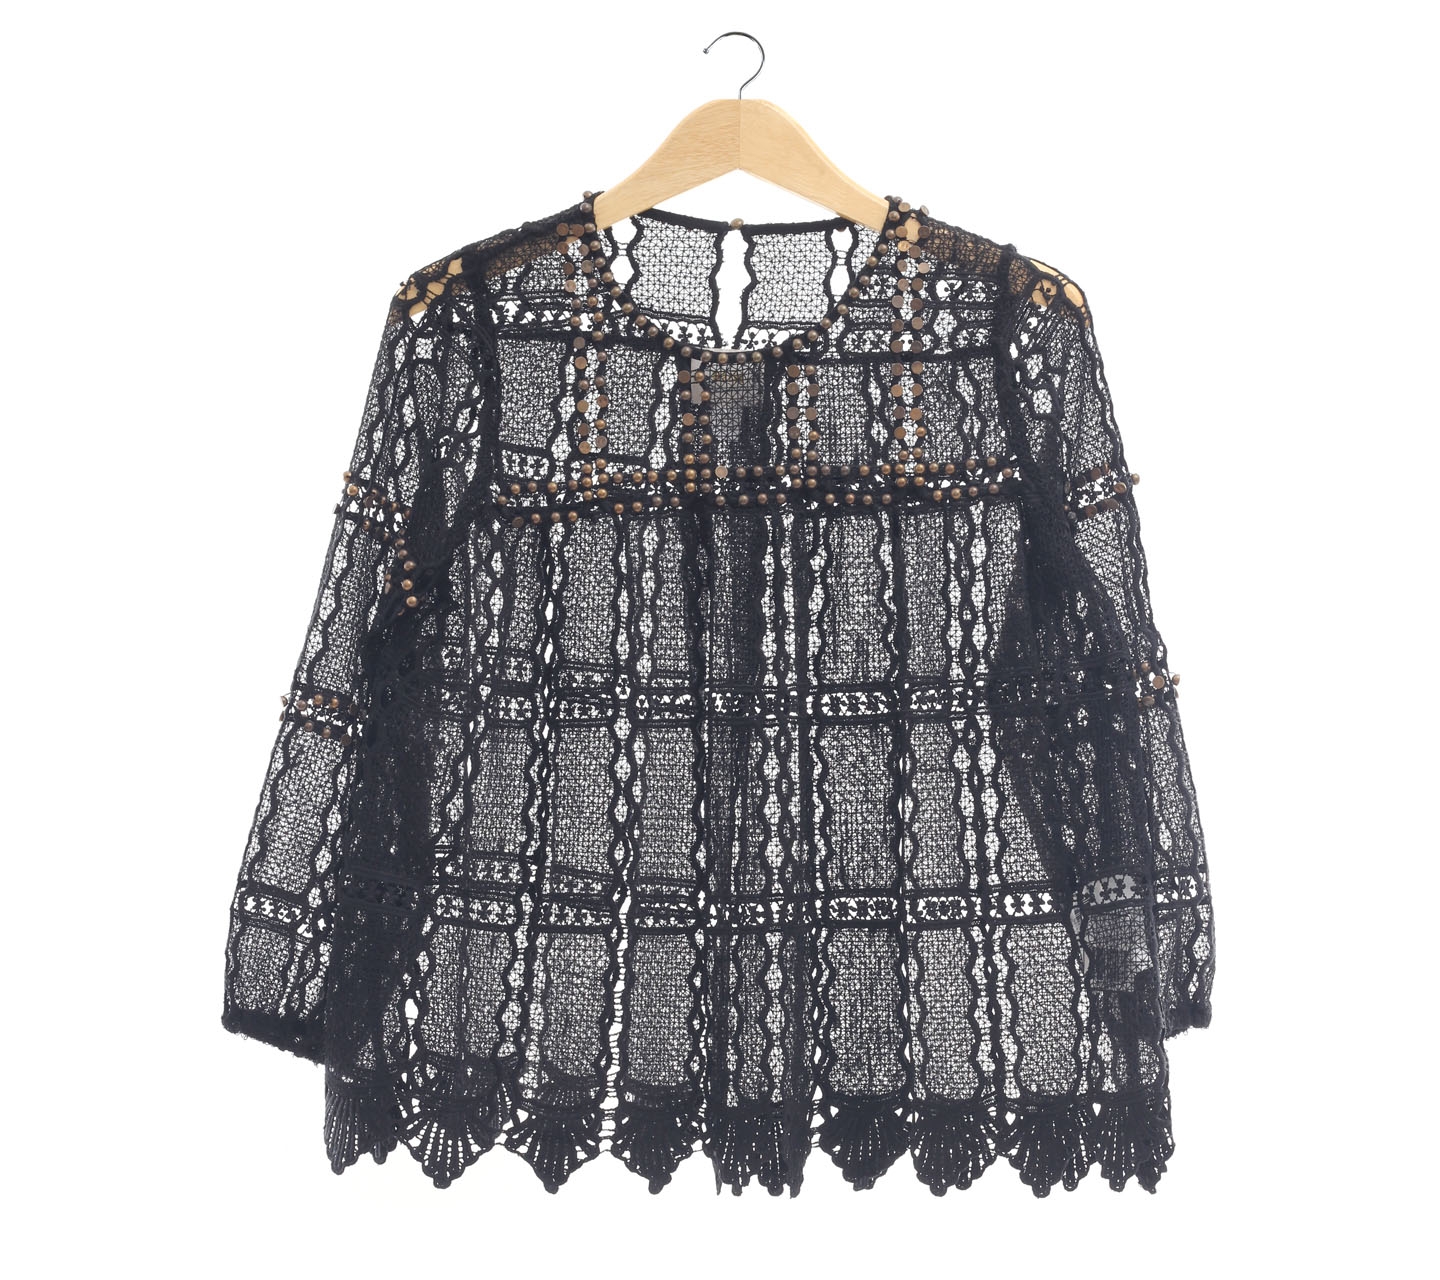 Maeve Black Lace WIth Studed Blouse